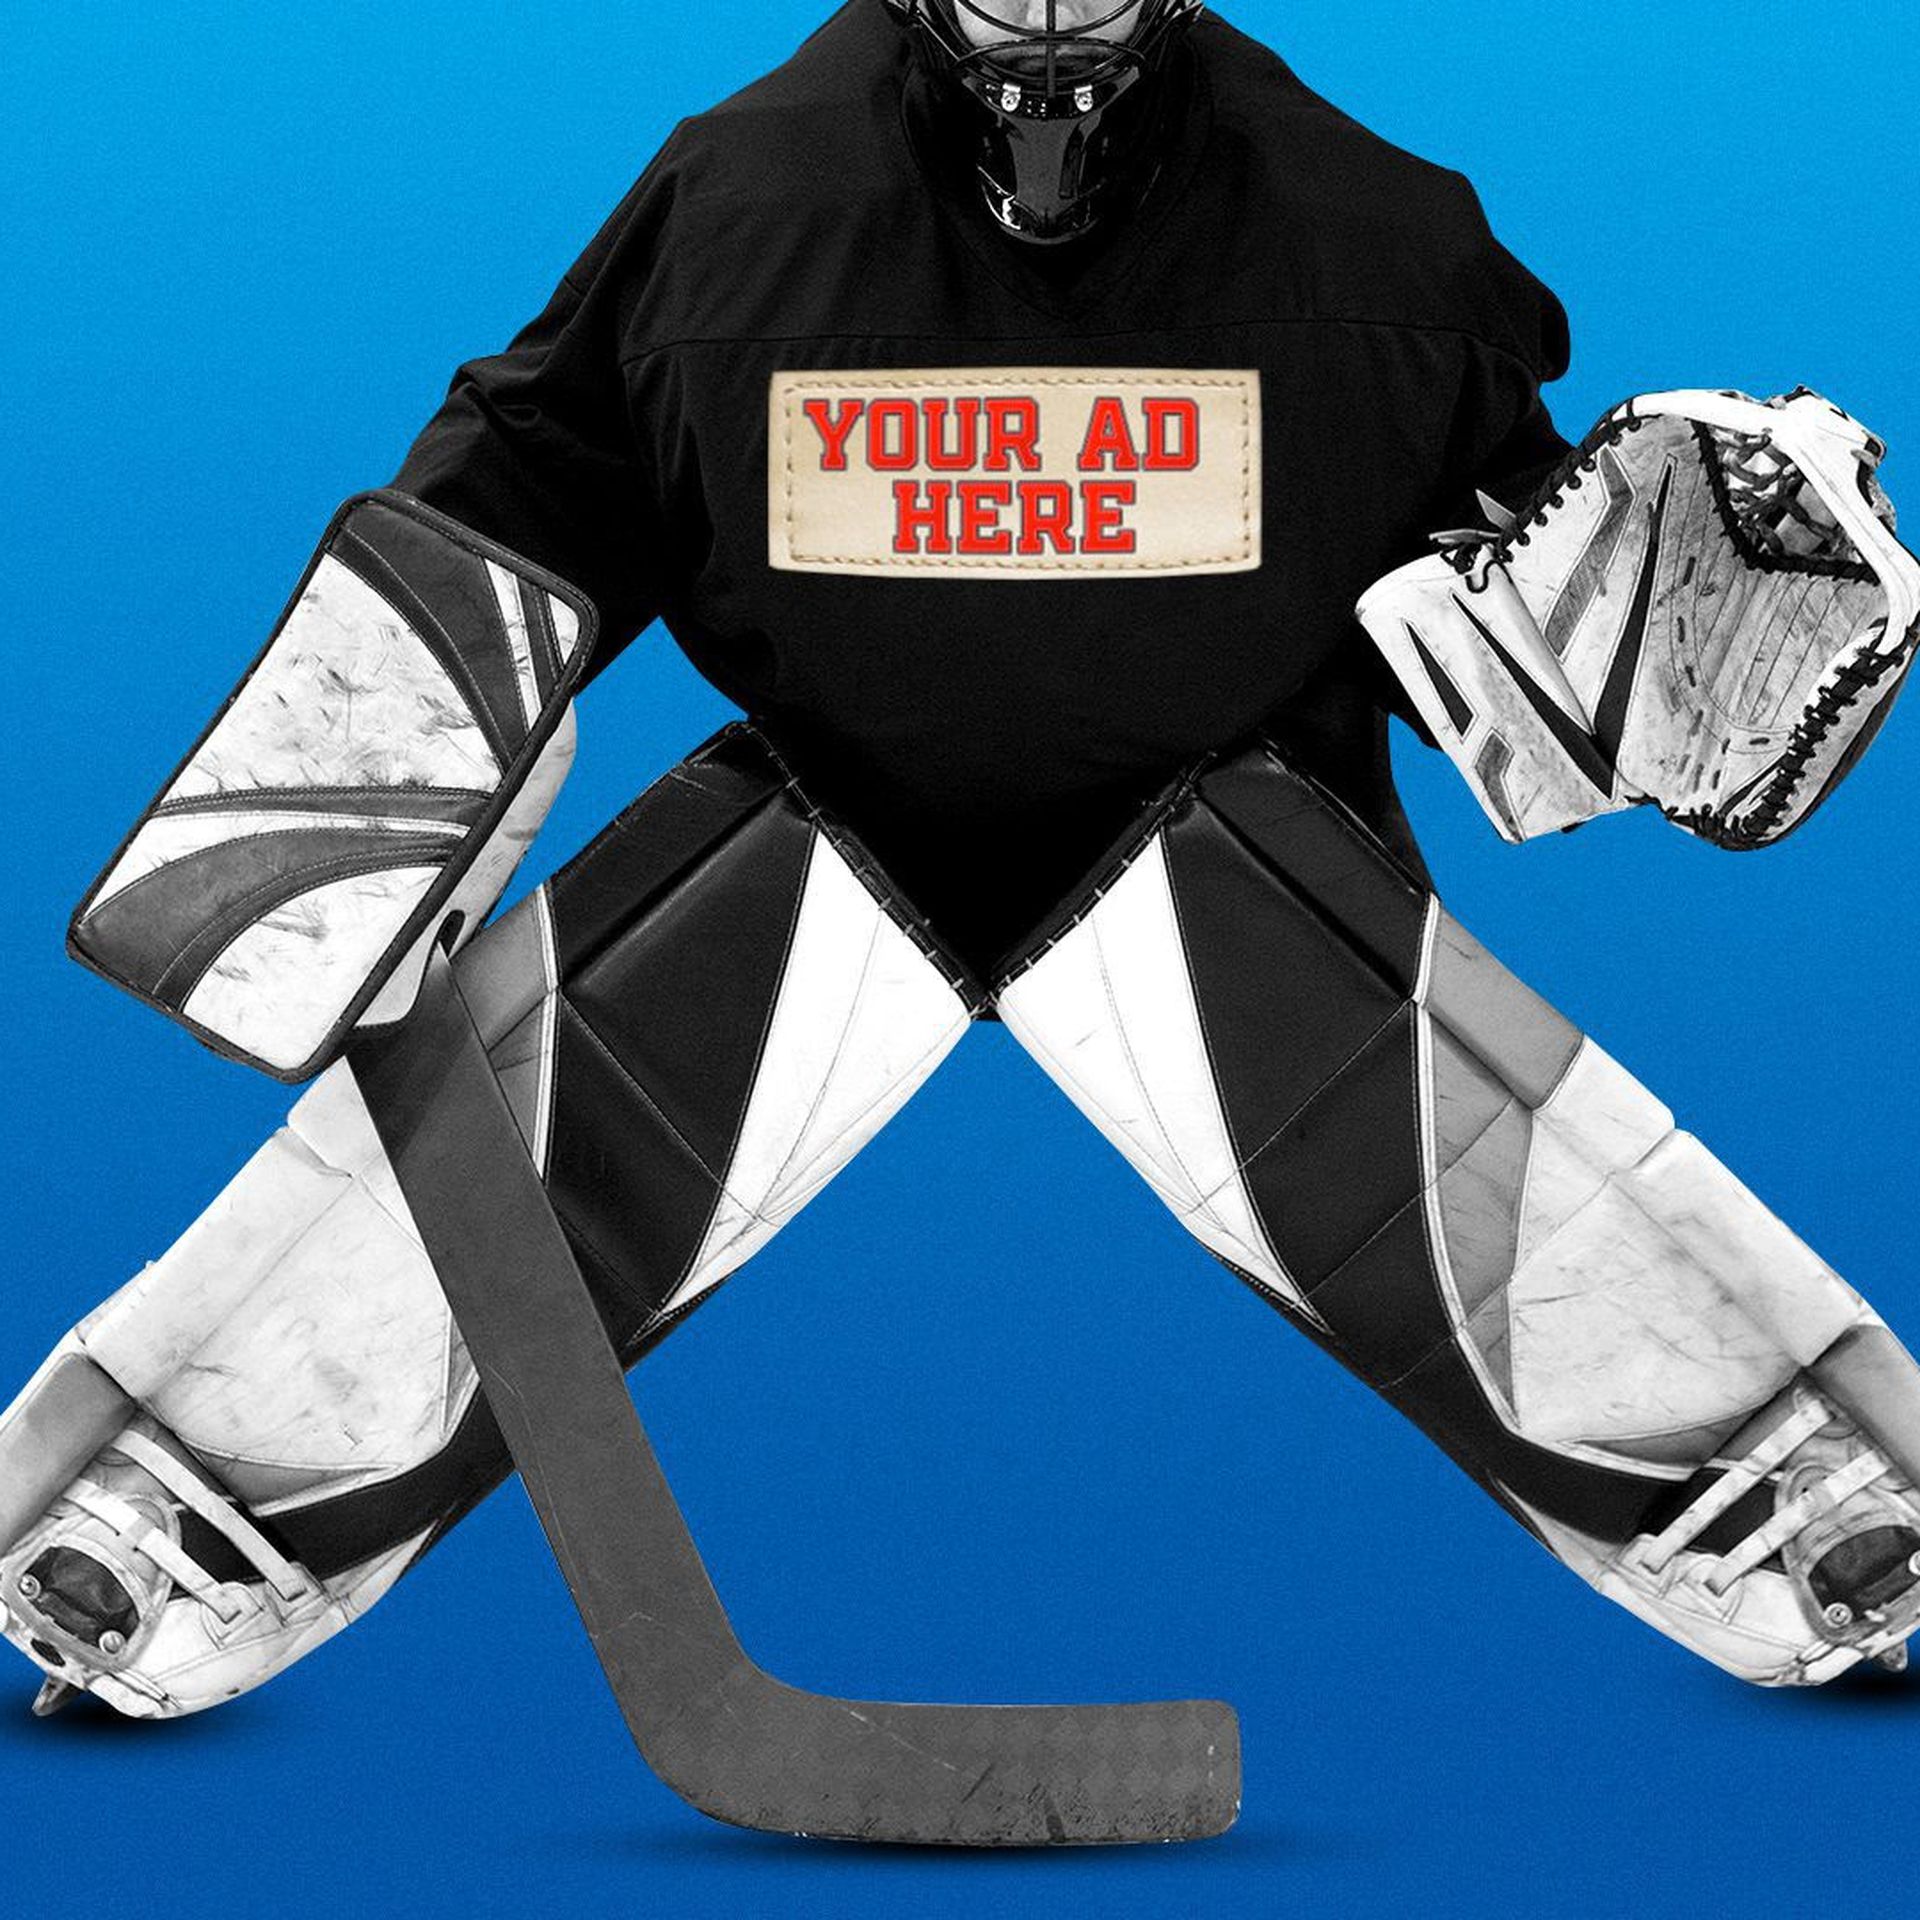  Jerseys ads coming to the NHL for 2022-23 season